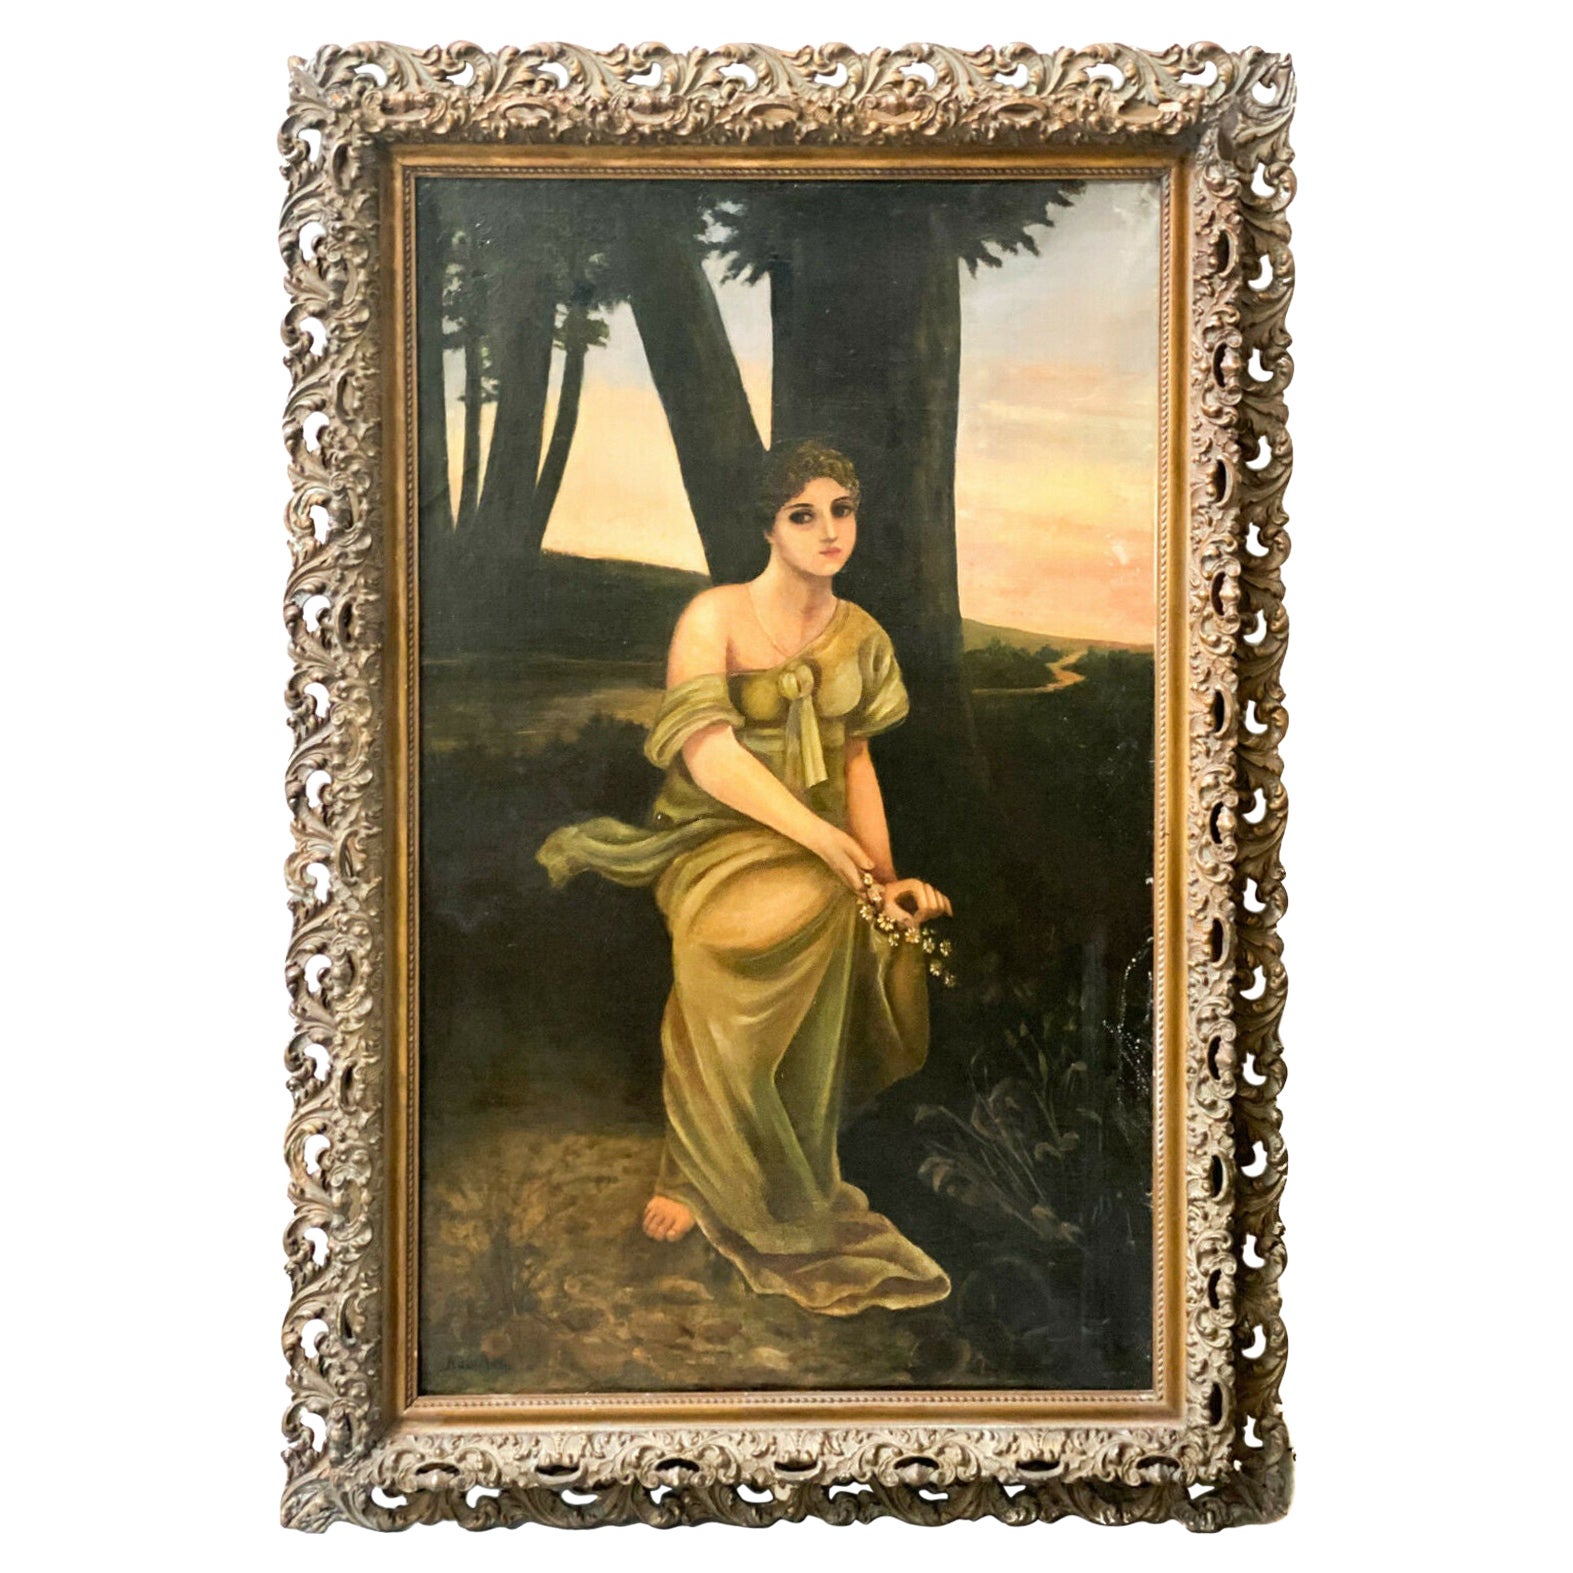 ADM Cooper Oil on Canvas Painting of a Seated Beauty